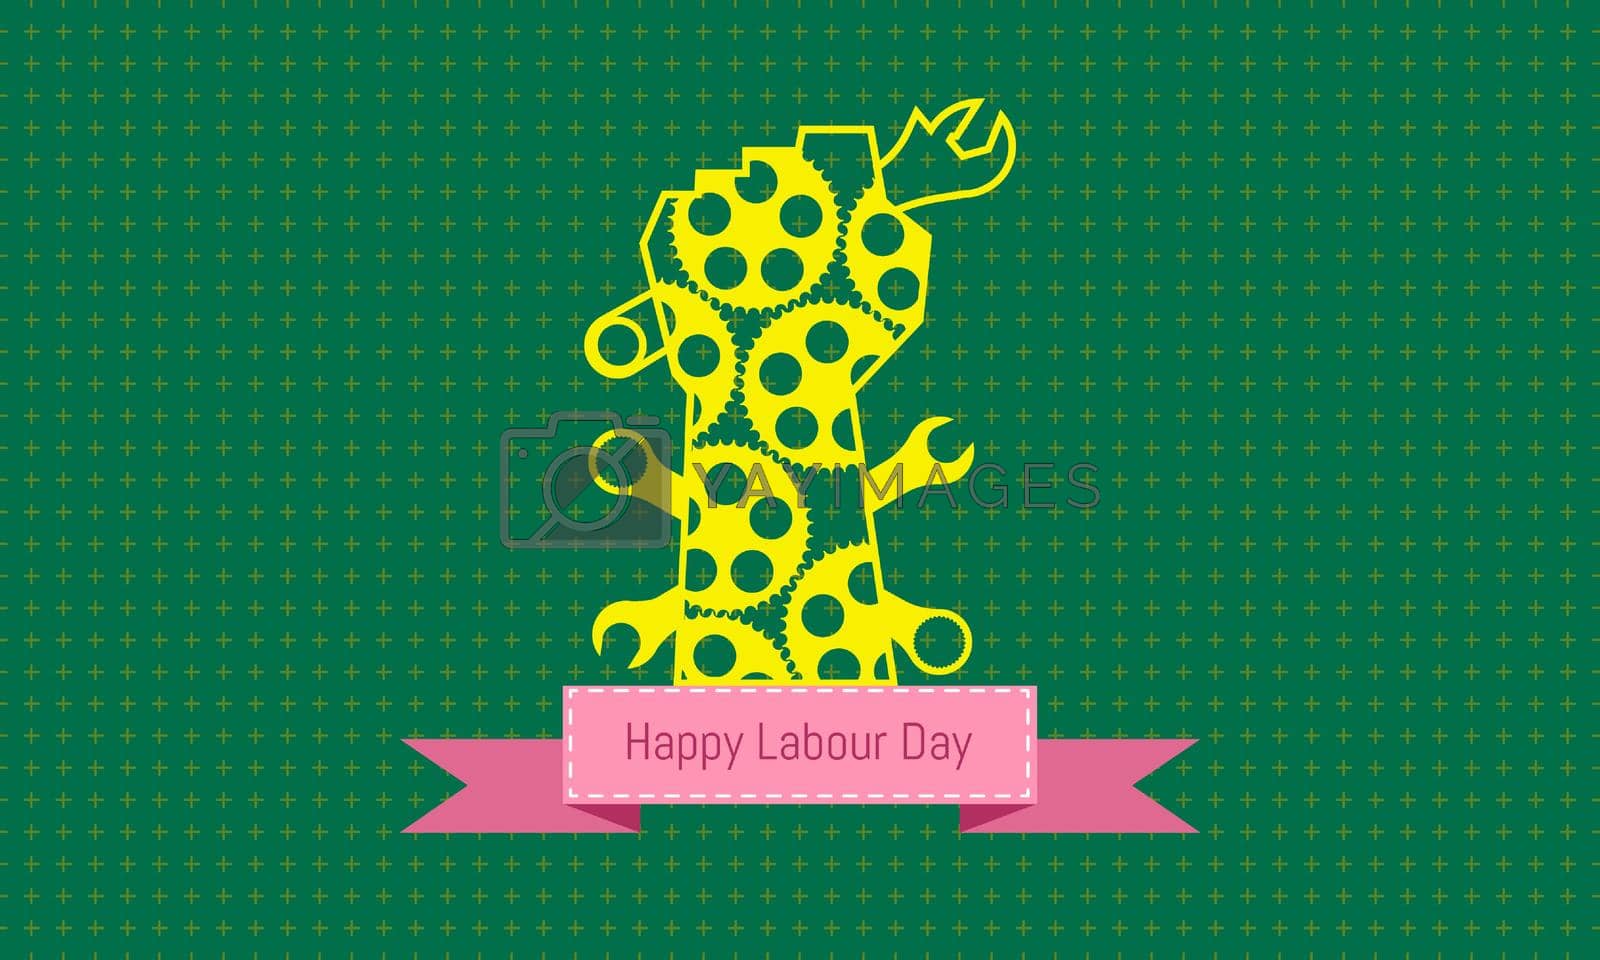 Royalty free image of happy labour day 1 may. yellow hand show up a tools. engineering design concept with screwdriver wrench ruler vernier caliper cheater bar.vector illustration  by Kmaunta